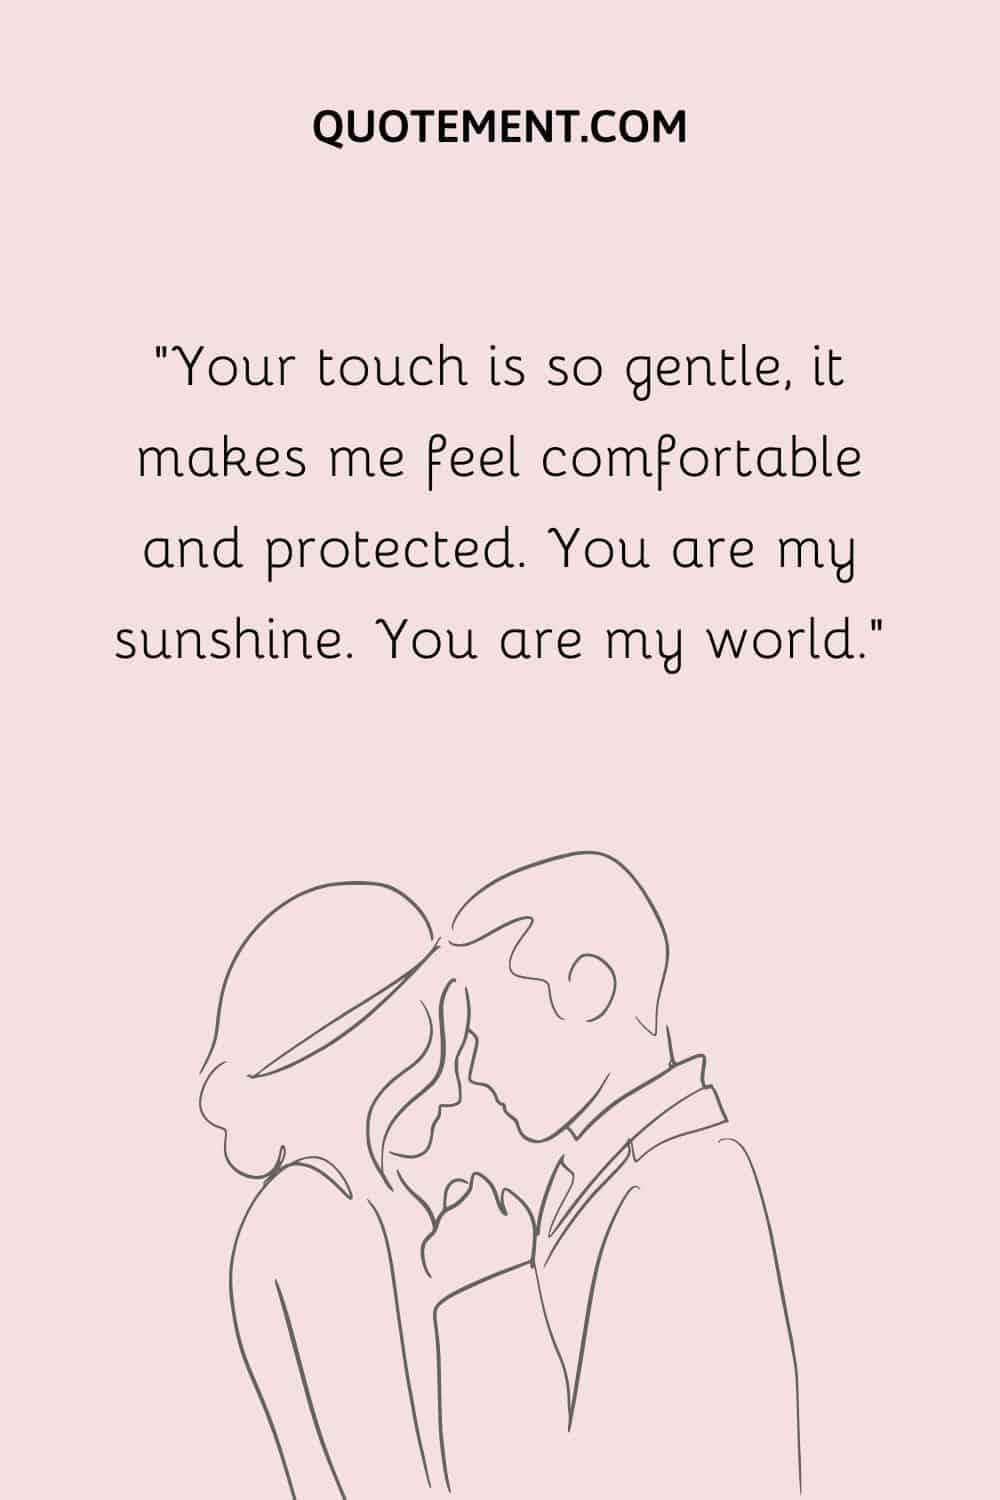 Your touch is so gentle, it makes me feel comfortable and protected